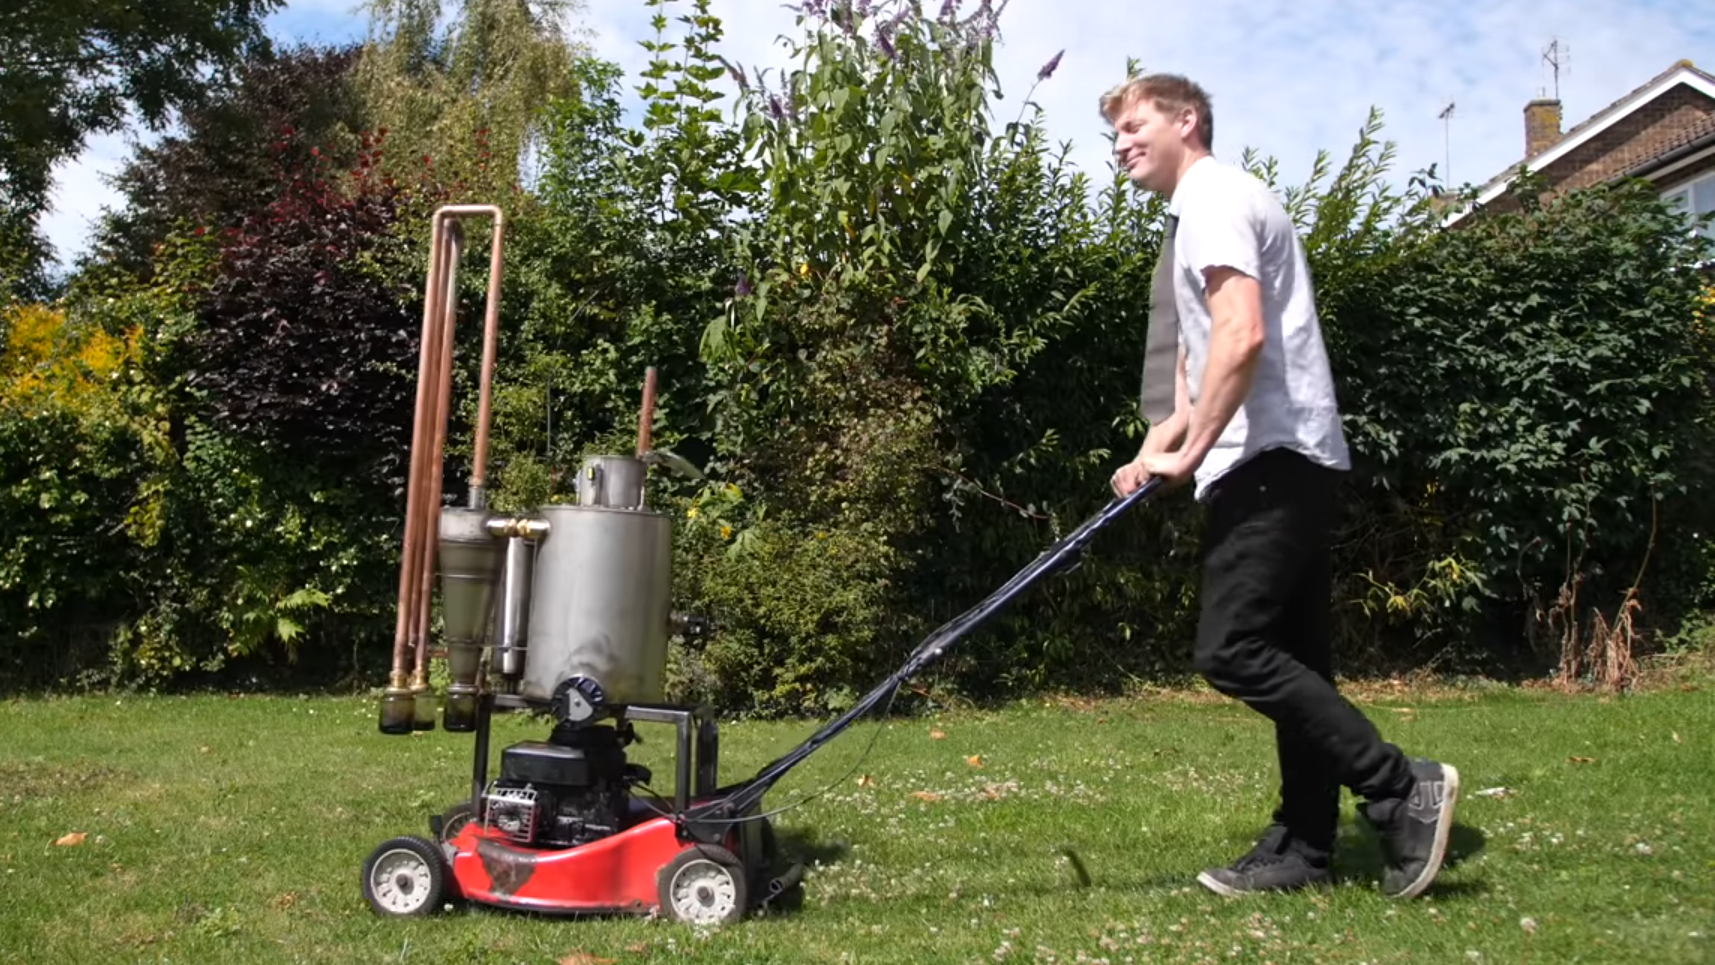 A Wood Gas Powered Lawn Mower